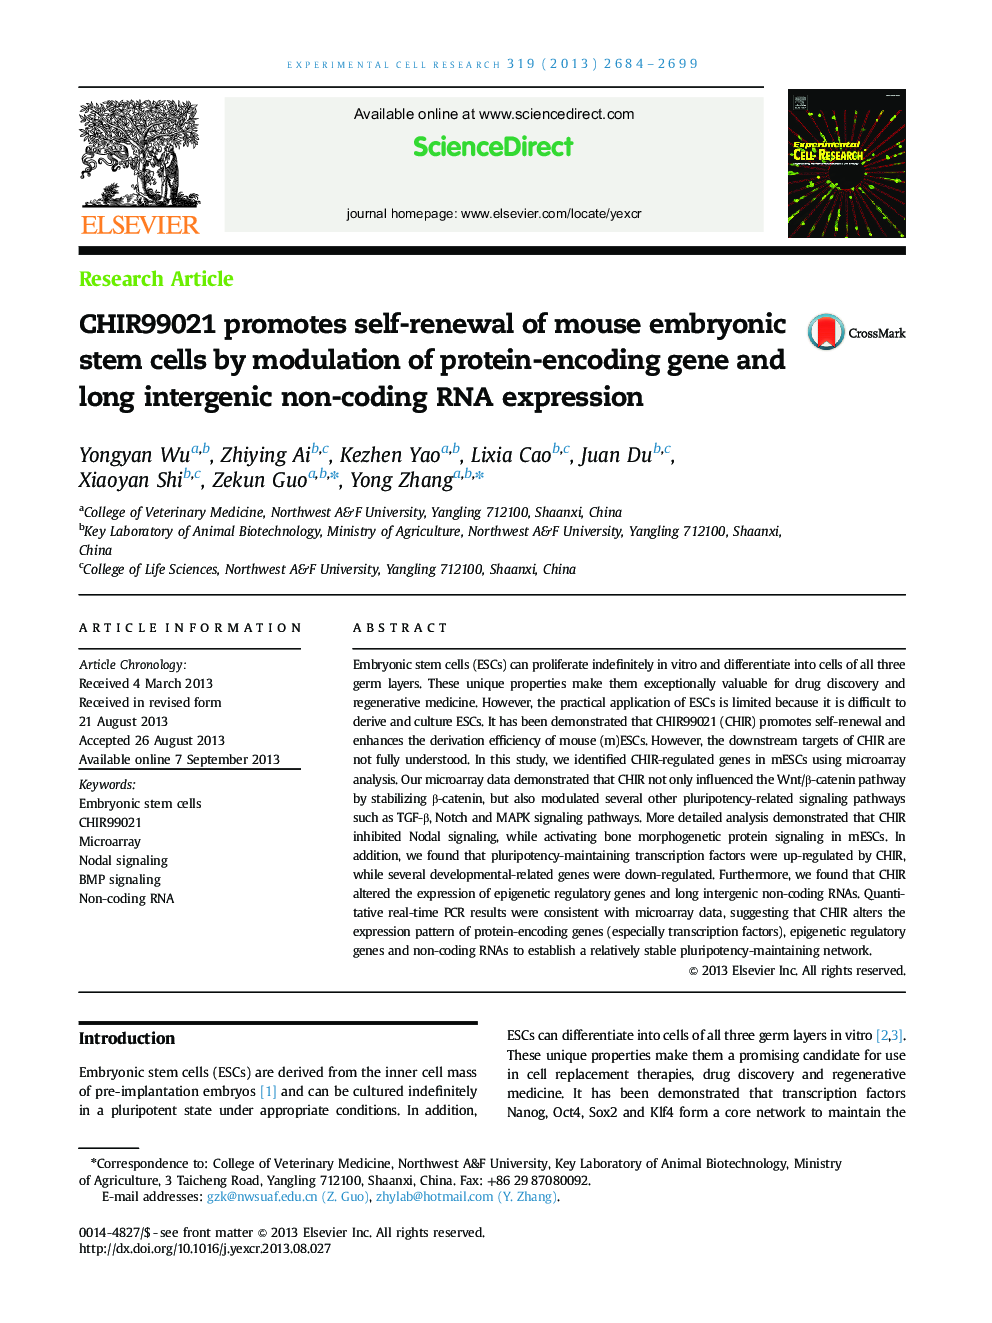 CHIR99021 promotes self-renewal of mouse embryonic stem cells by modulation of protein-encoding gene and long intergenic non-coding RNA expression